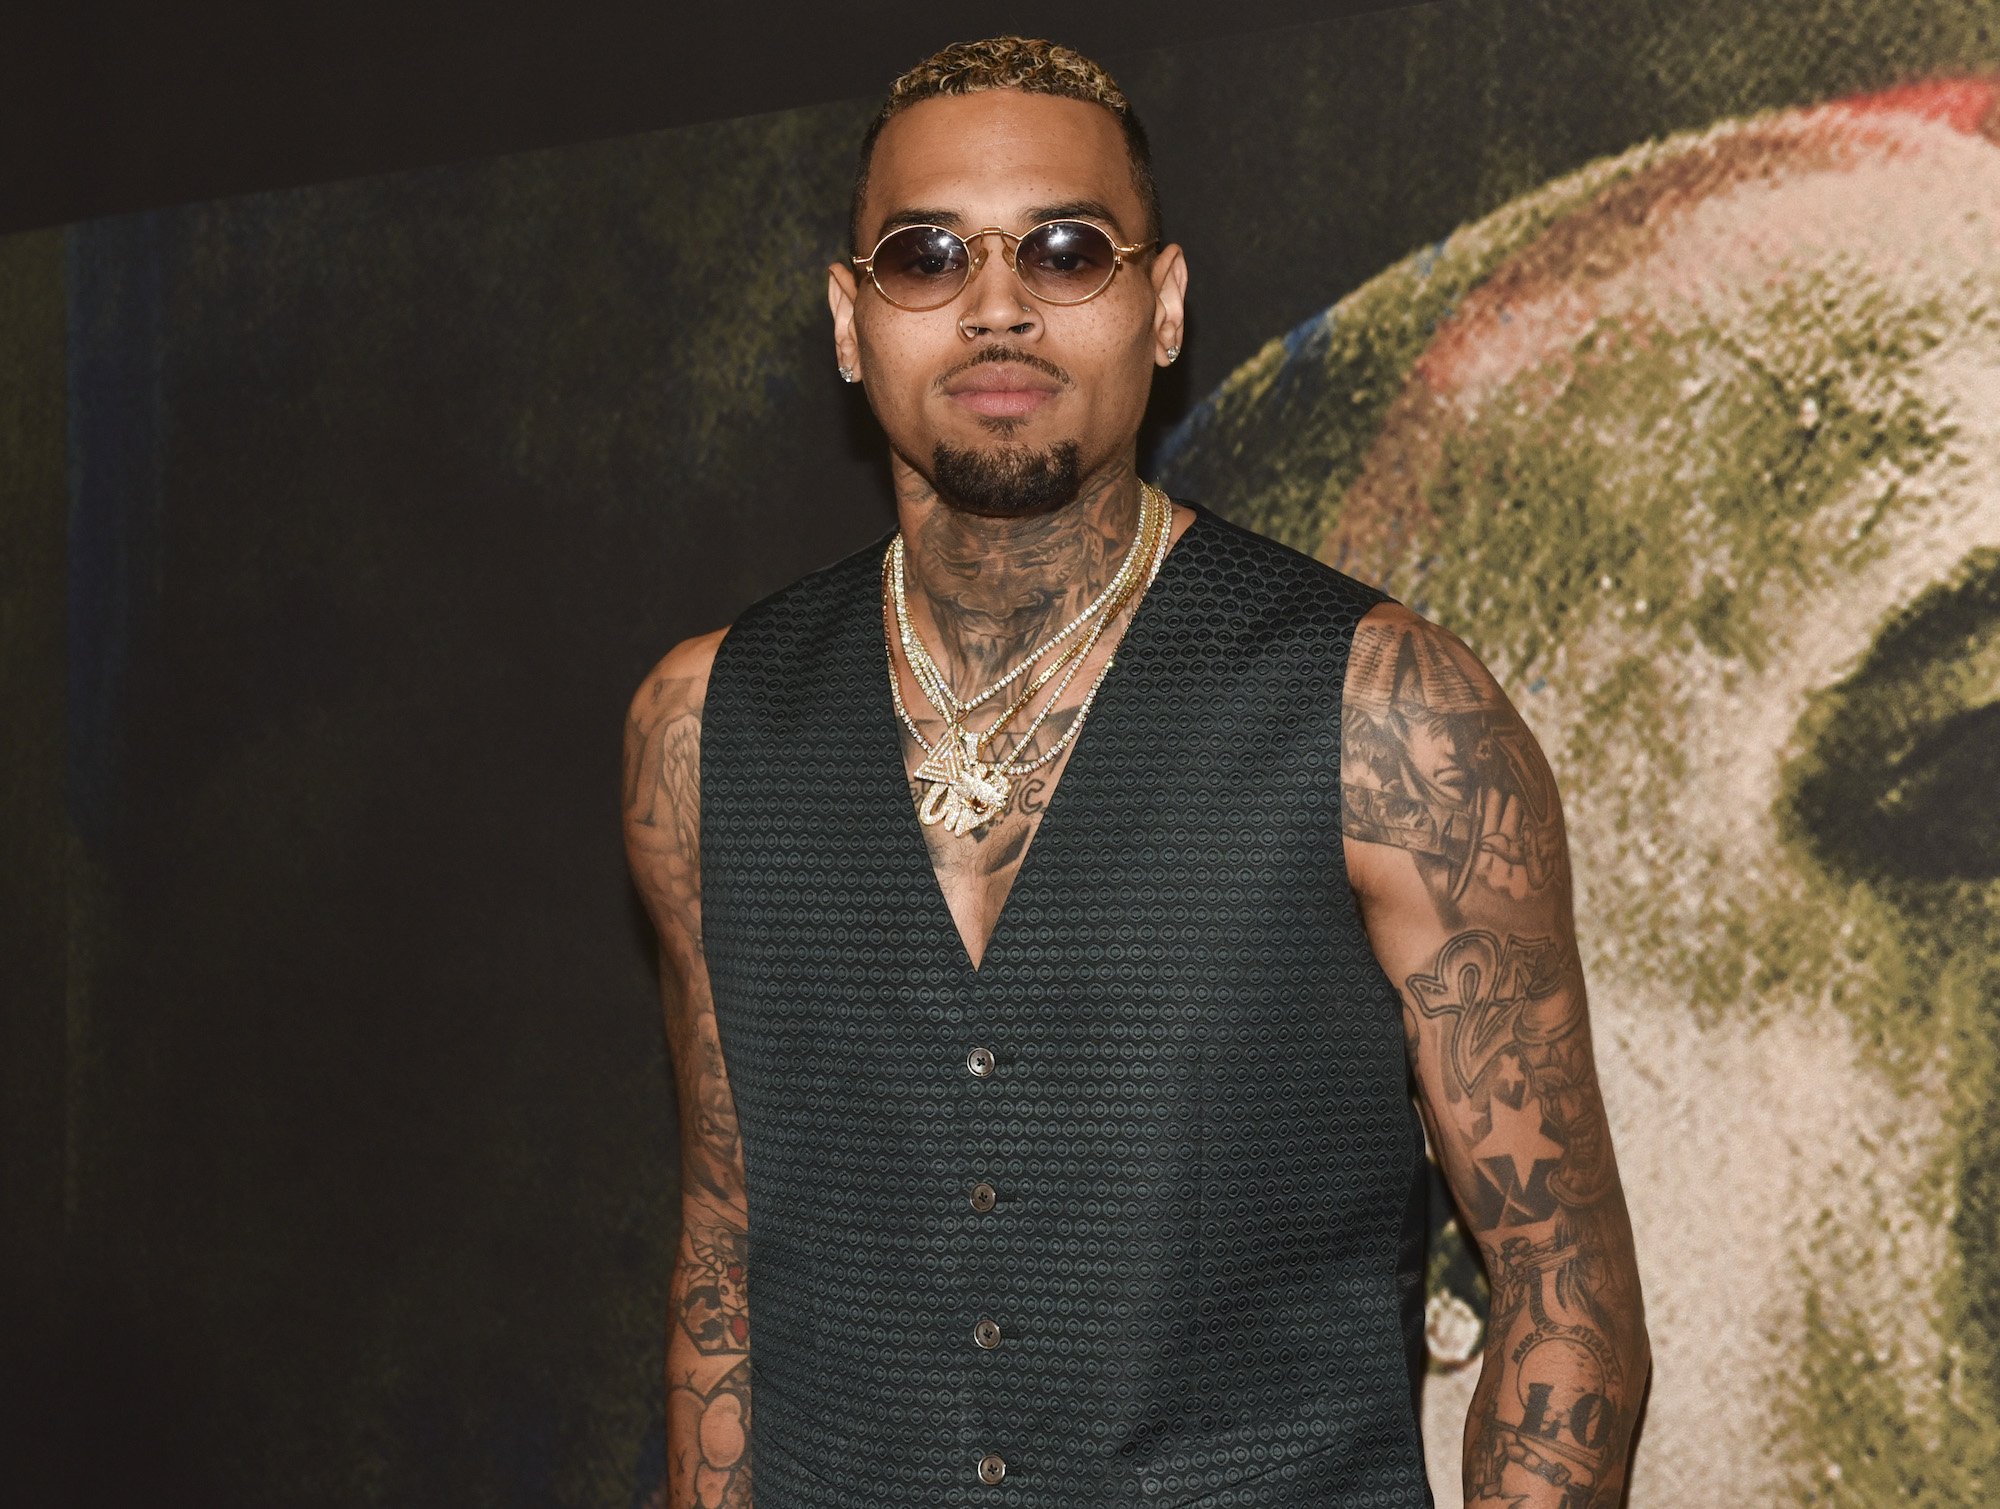 Chris Brown wearing sunglasses in front of a blurred background with an image